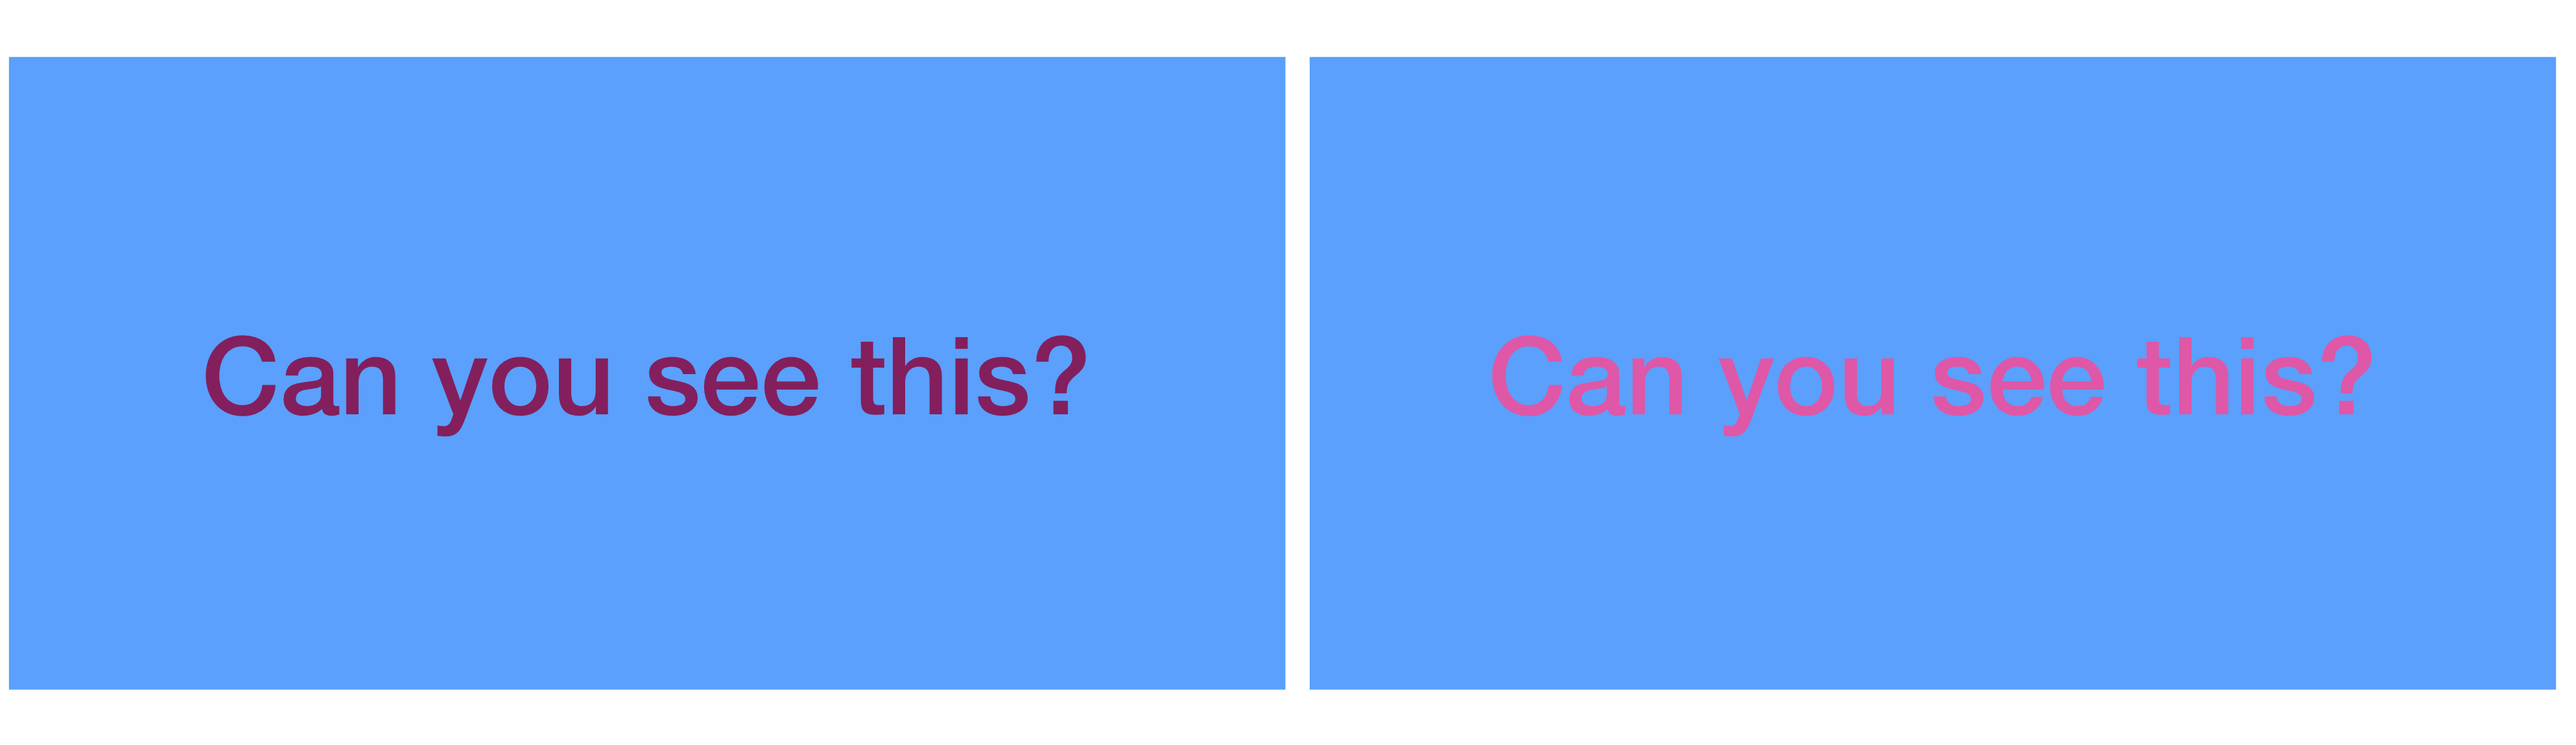 blue square with purple writing "Can you see this?"; left with luminance contrast, right without
luminance contrast between background and writing